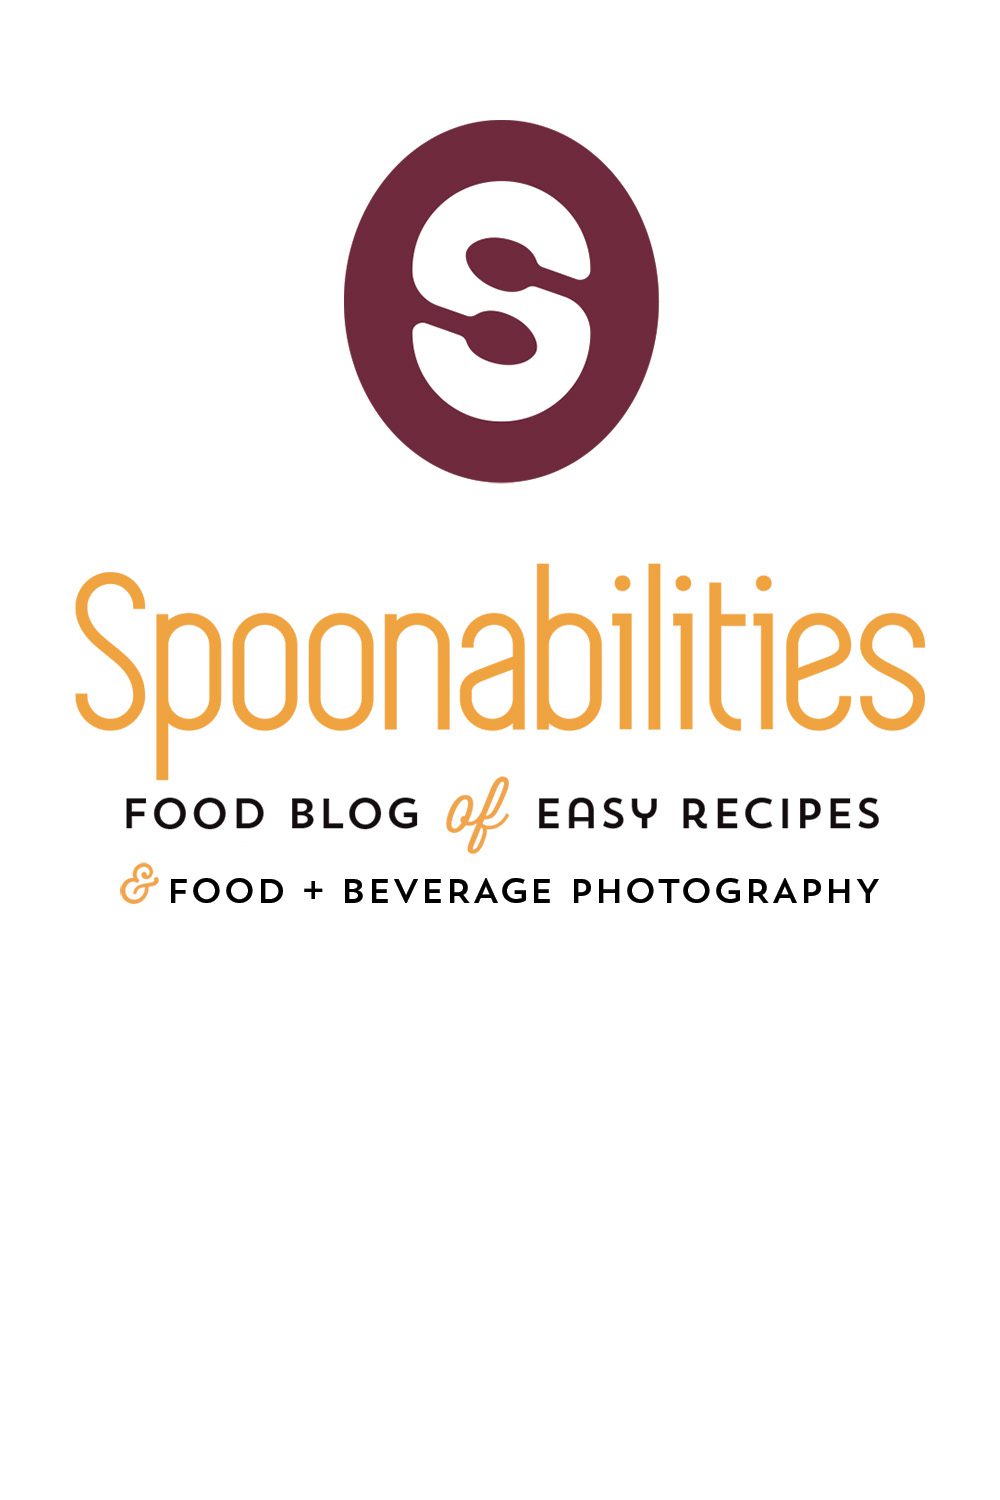 Easy Recipes and Food Photography Services